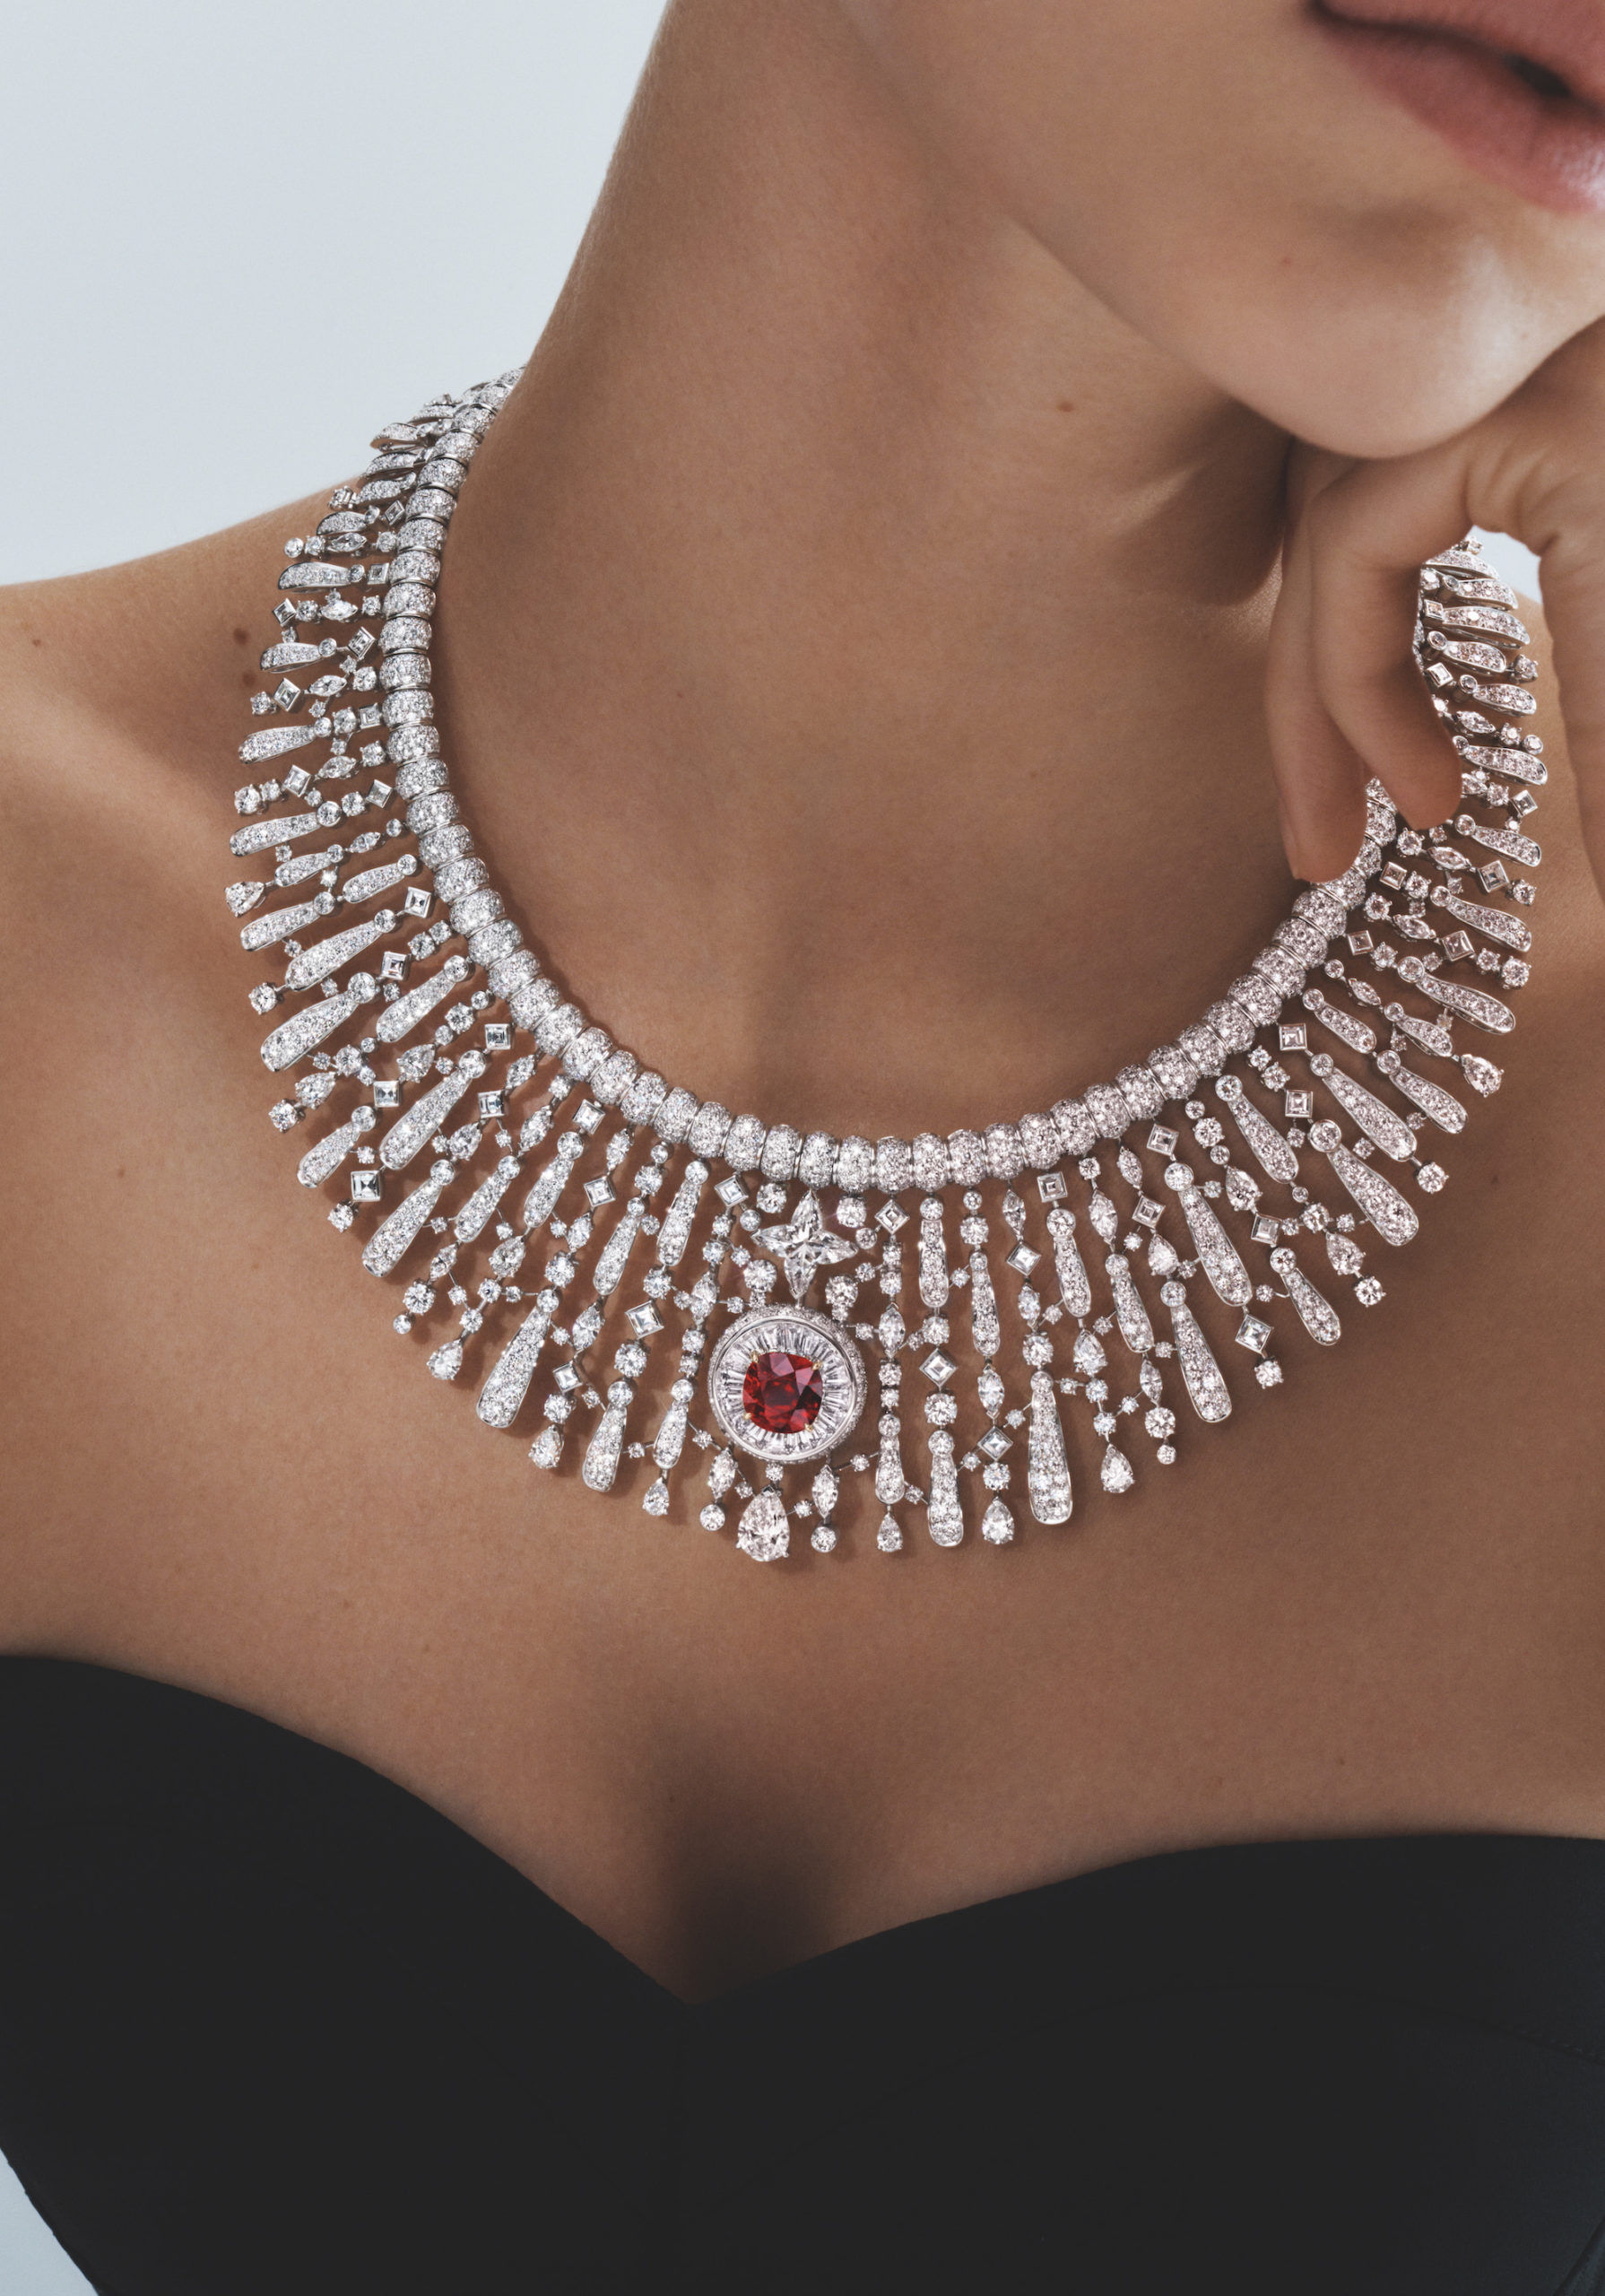 Chanel, Louis Vuitton and More Debut Stunning New High Jewelry